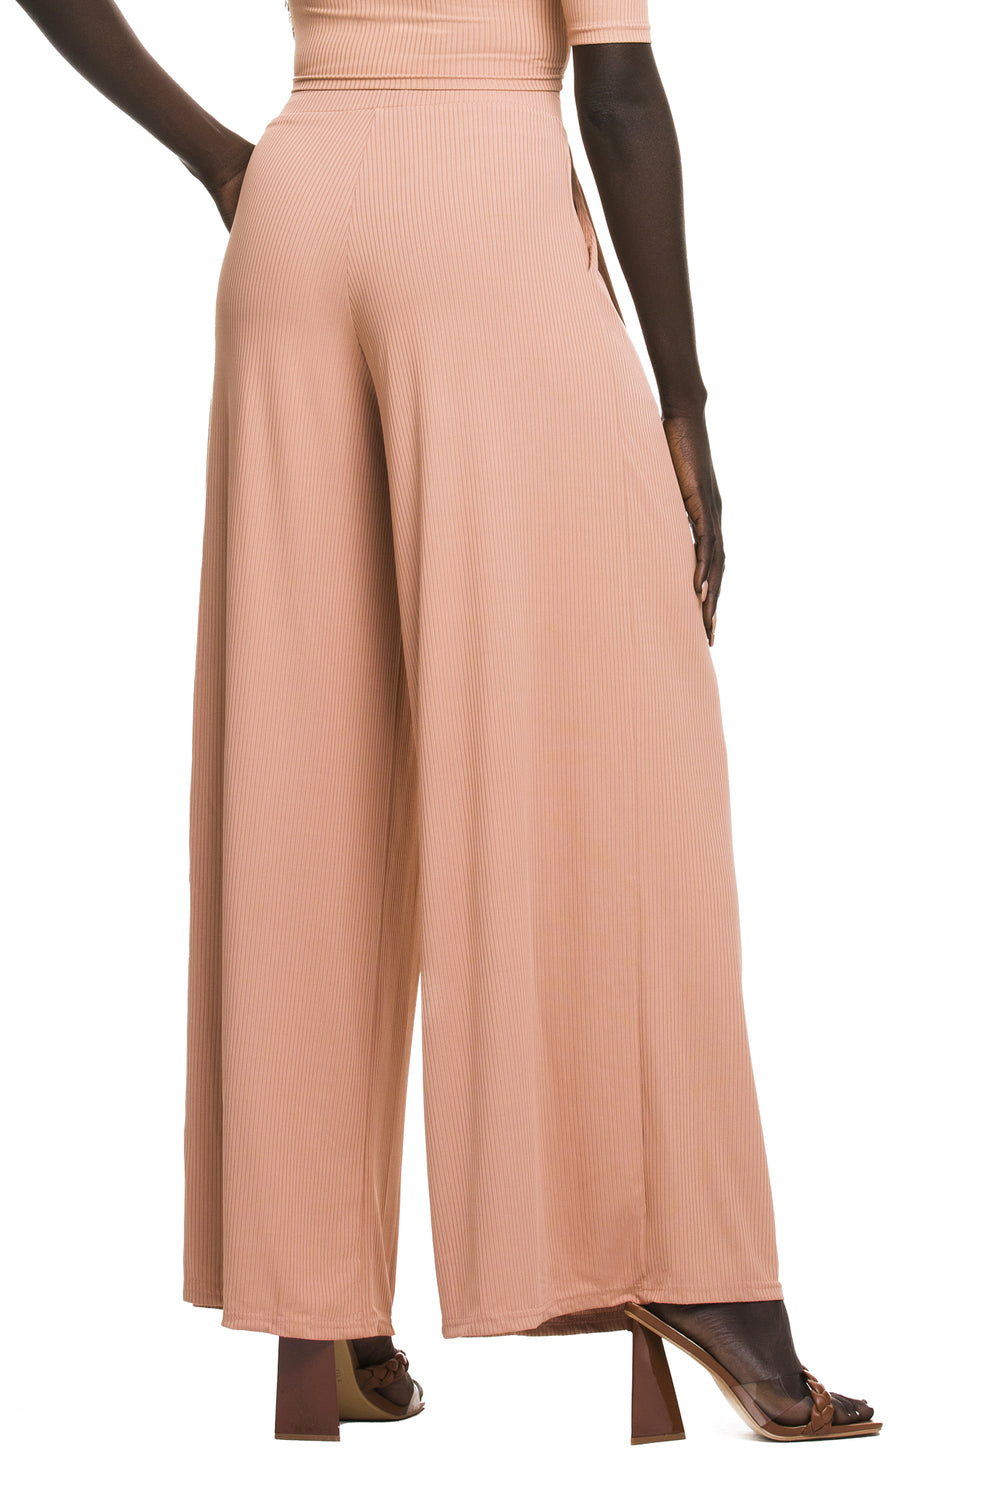 Brigitte Taupe Ribbed Wide Leg Pants - Expressive Collective CO.